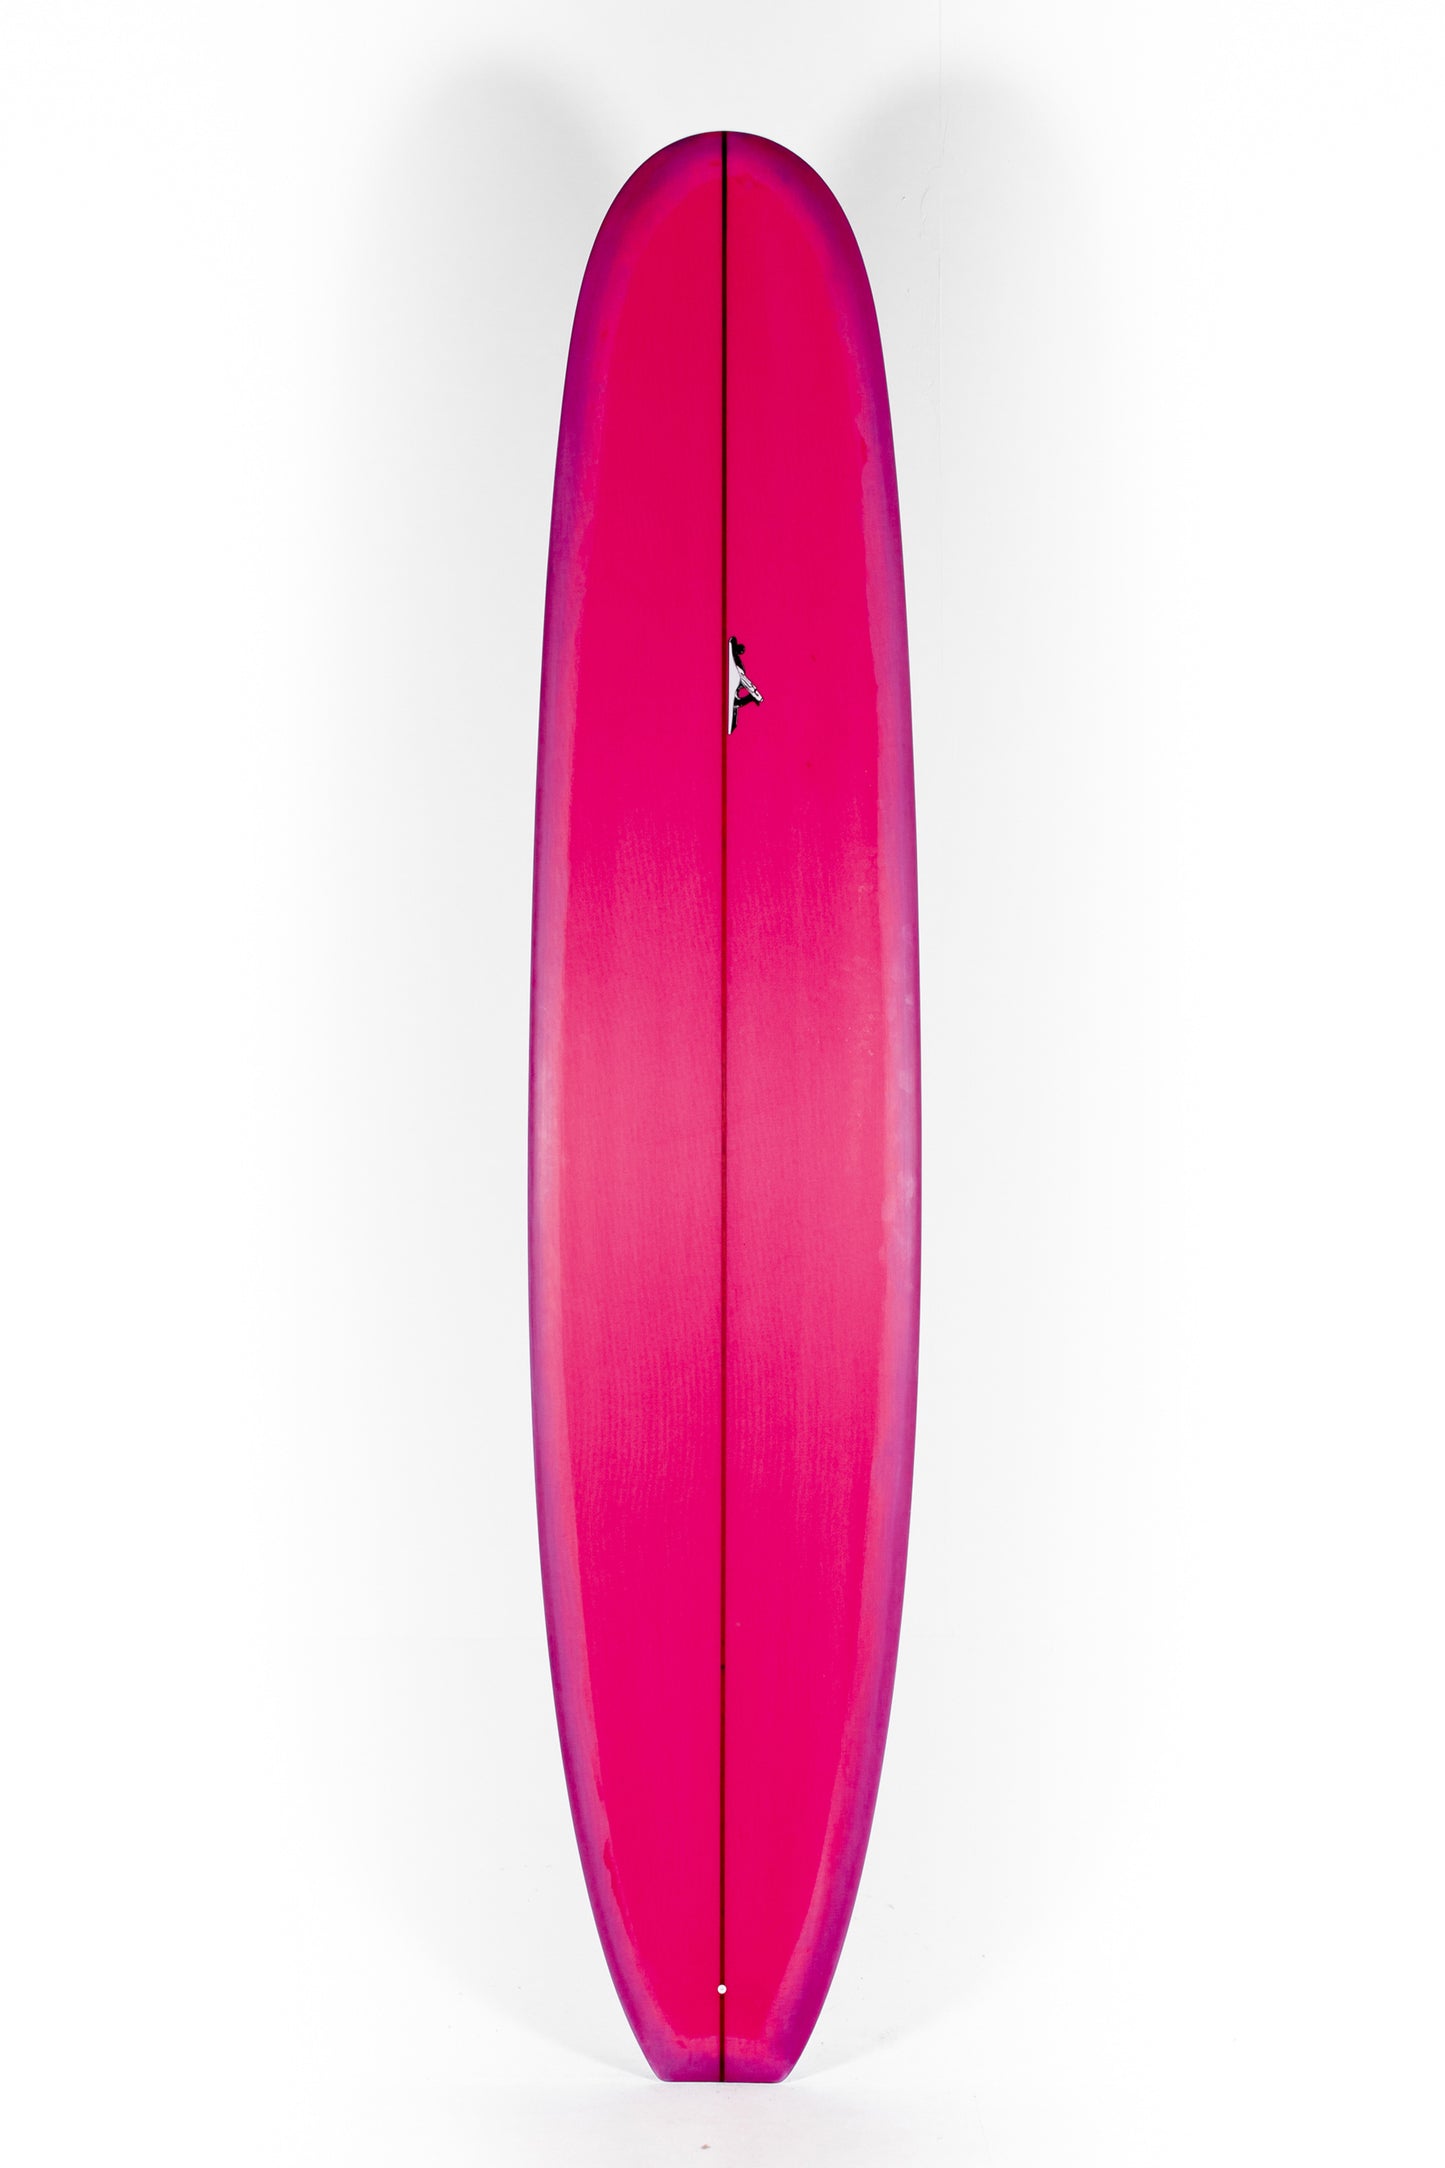 Pukas Surf Shop_Thomas Surfboards - SCOOP TAIL NOSERIDER - 9'4" x 22 15/16 x 2 15 /16 x 72.3L - SCOOP94